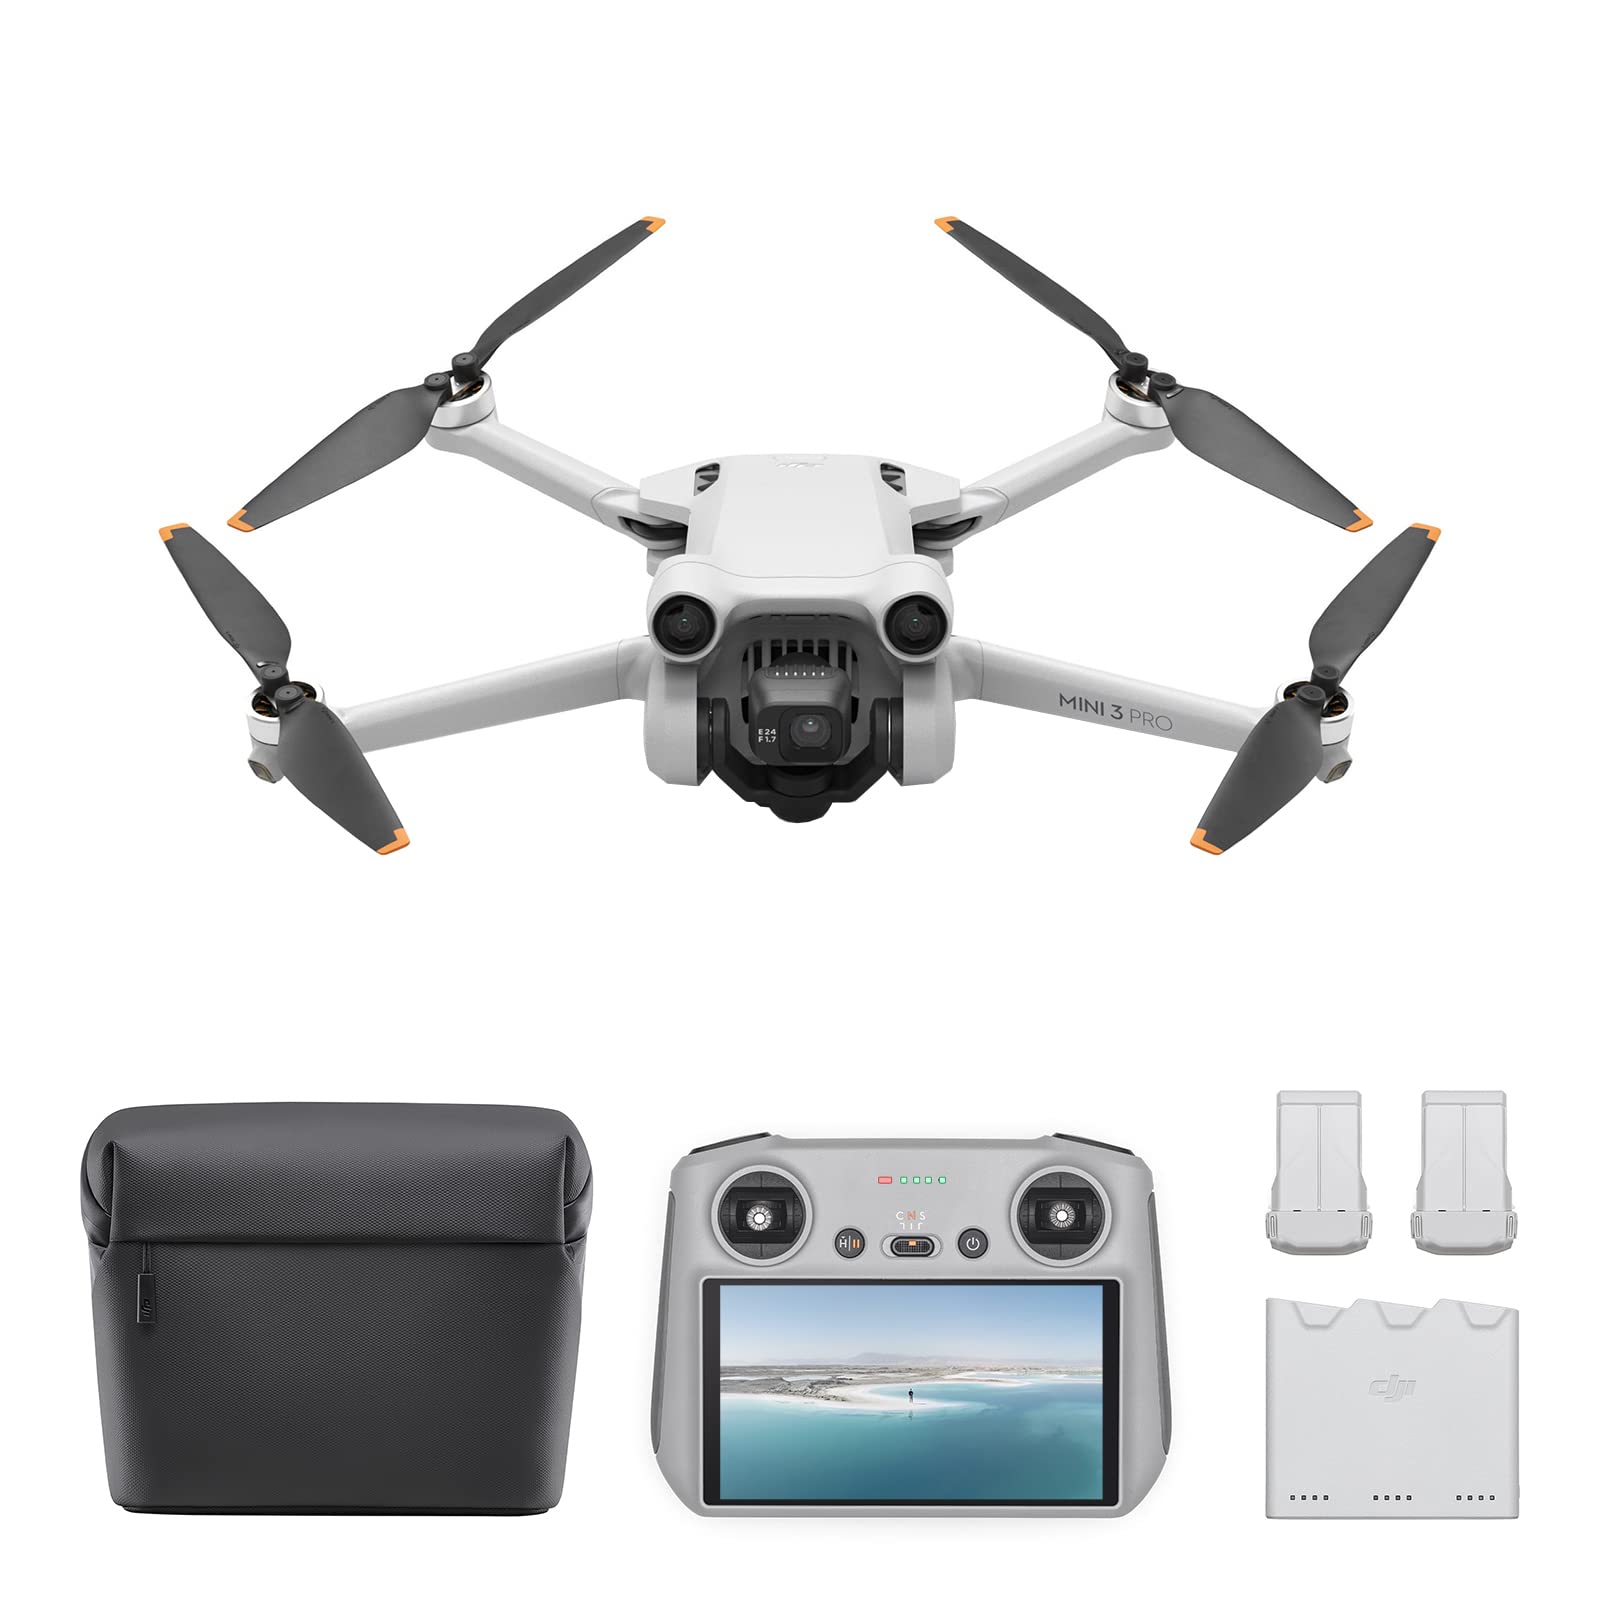 DJI Mini 3 Pro ( RC) & Fly More Kit Plus – Lightweight and Foldable Camera Drone with 4K/60fps Video, 47-min Flight Time, Tri-Directional Obstacle Sensing, Ideal for Aerial Photography